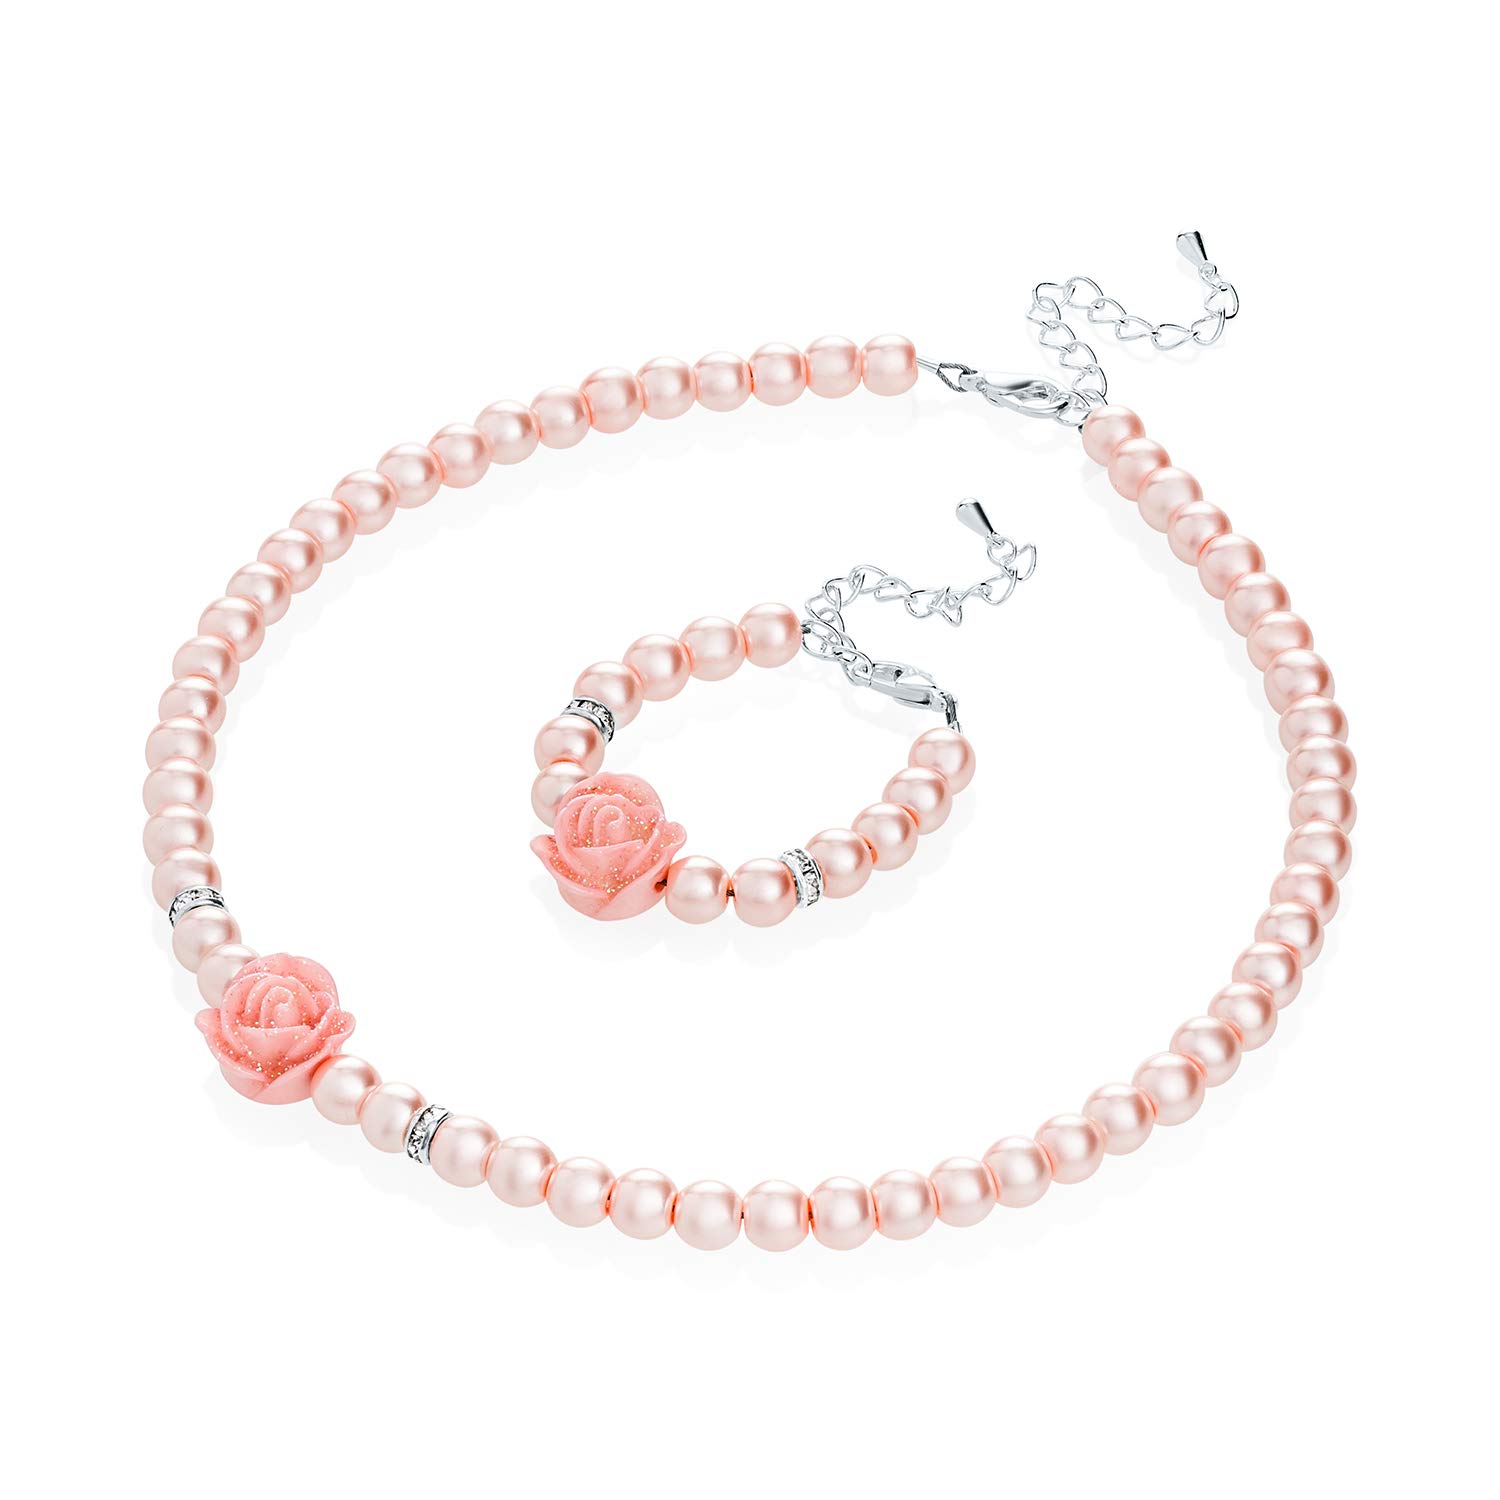 Crystal Dream Flower Girl Pink Simulated Pearls Flower Necklace with Bracelet Toddler Gift Set (GSTNB2-P)